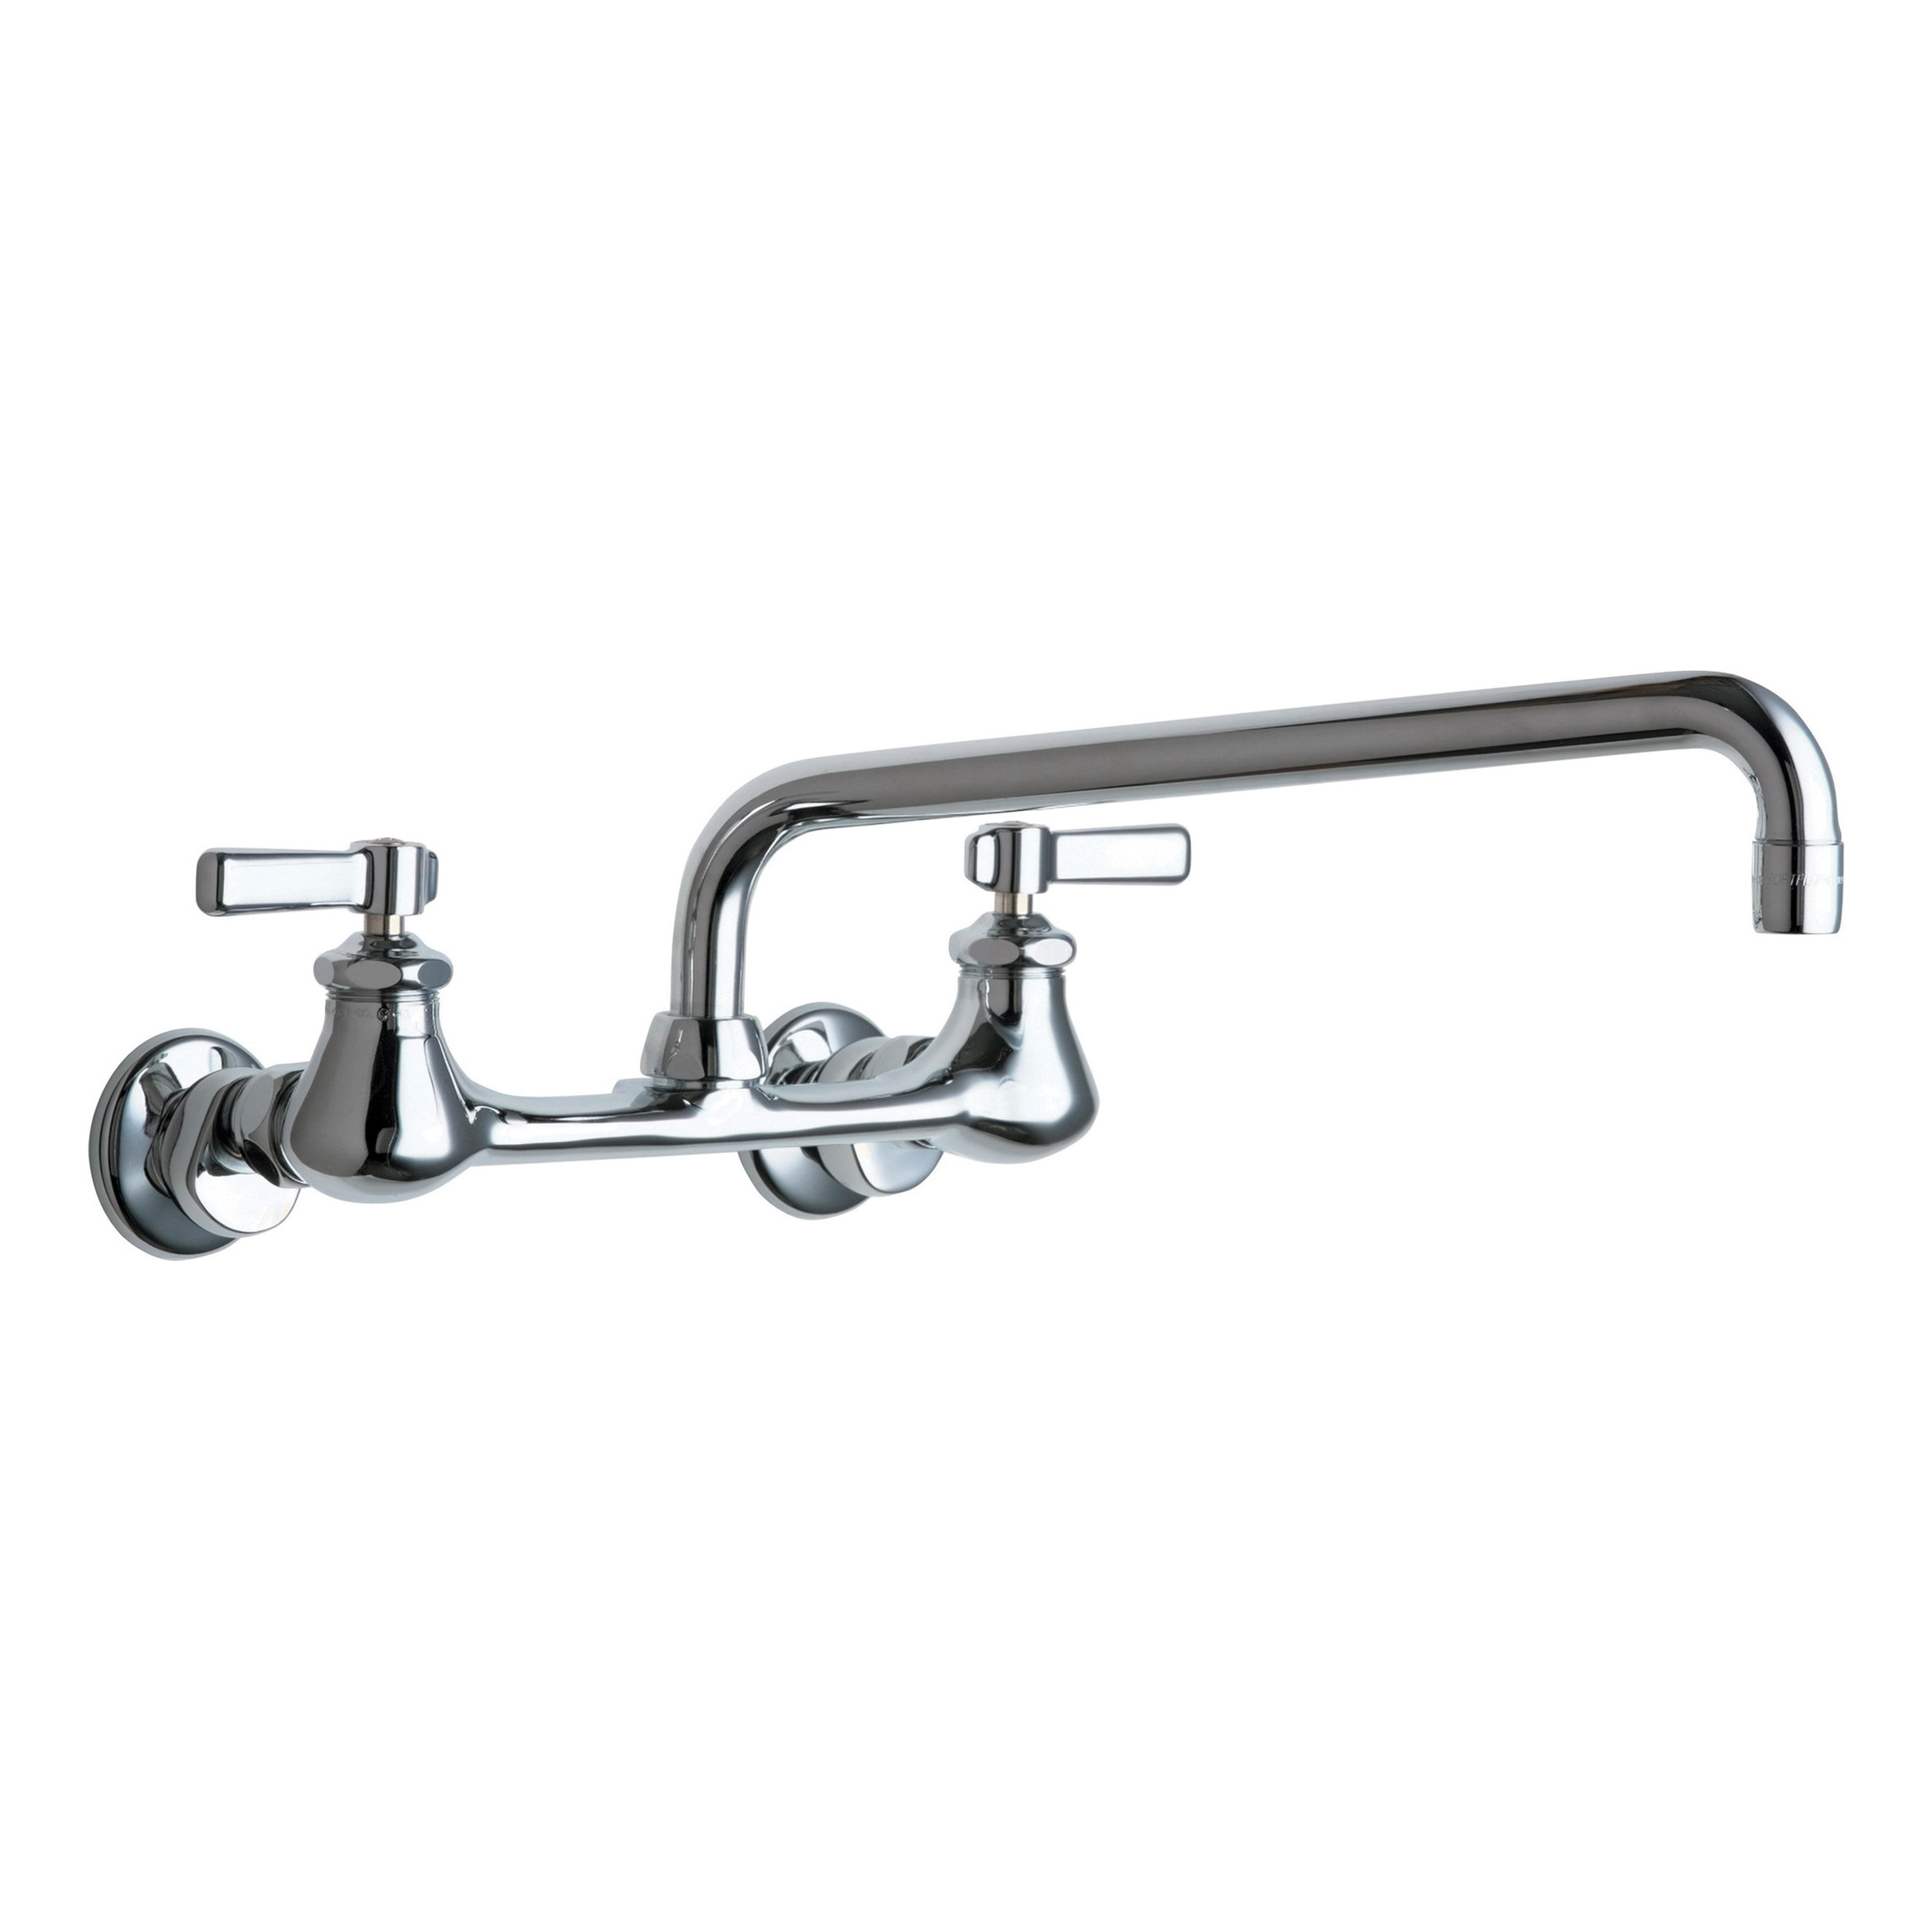 Chicago Faucet 540 Ldl12e35abcp Hirsch Pipe Supply